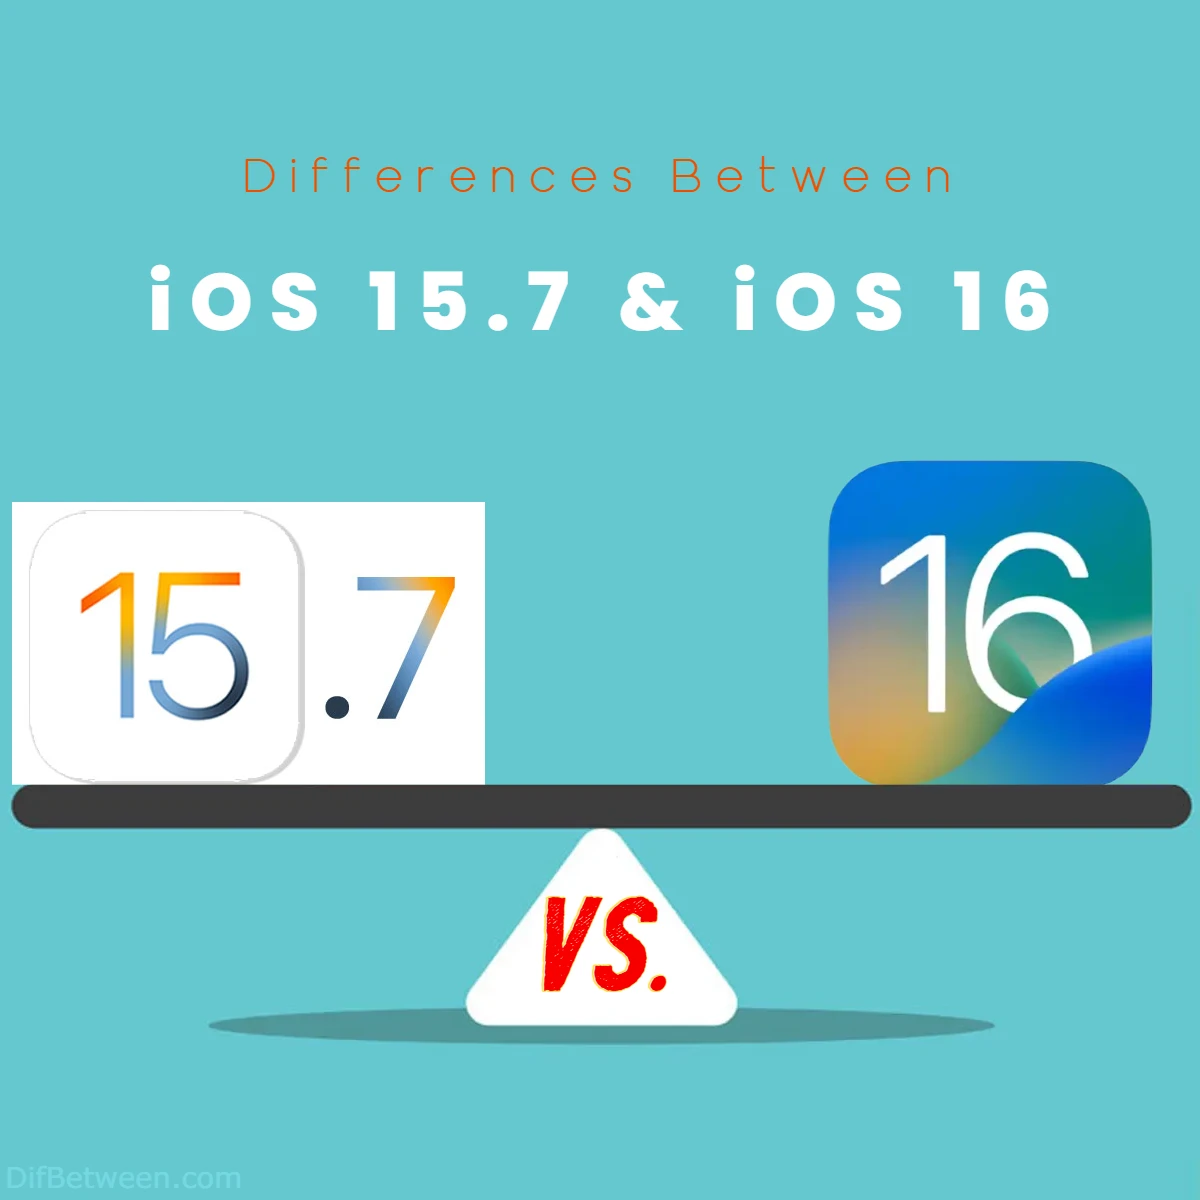 Difference Between iOS 16 and iOS 15 7